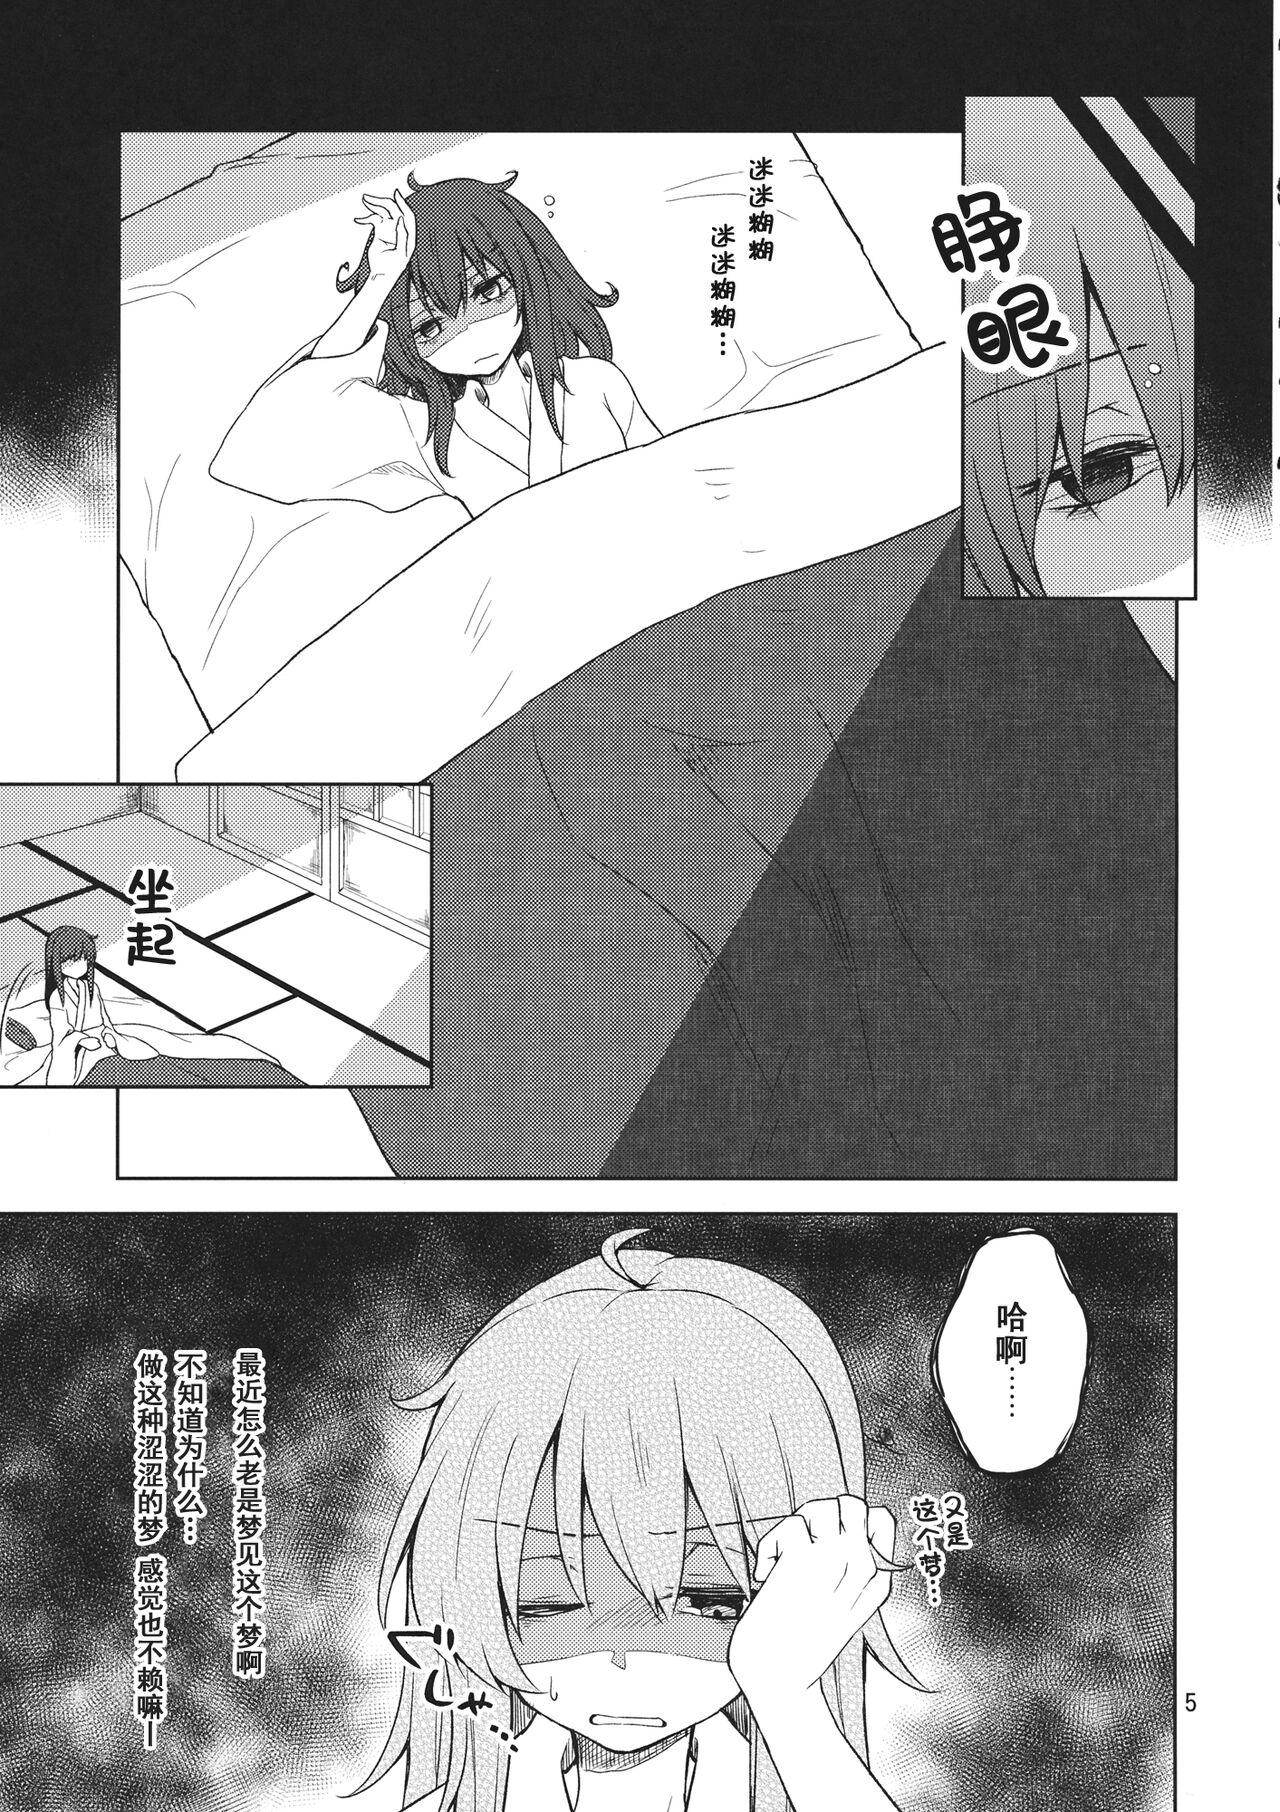 Leggings Shoyamu - First Night Dream - Touhou project Instagram - Page 4